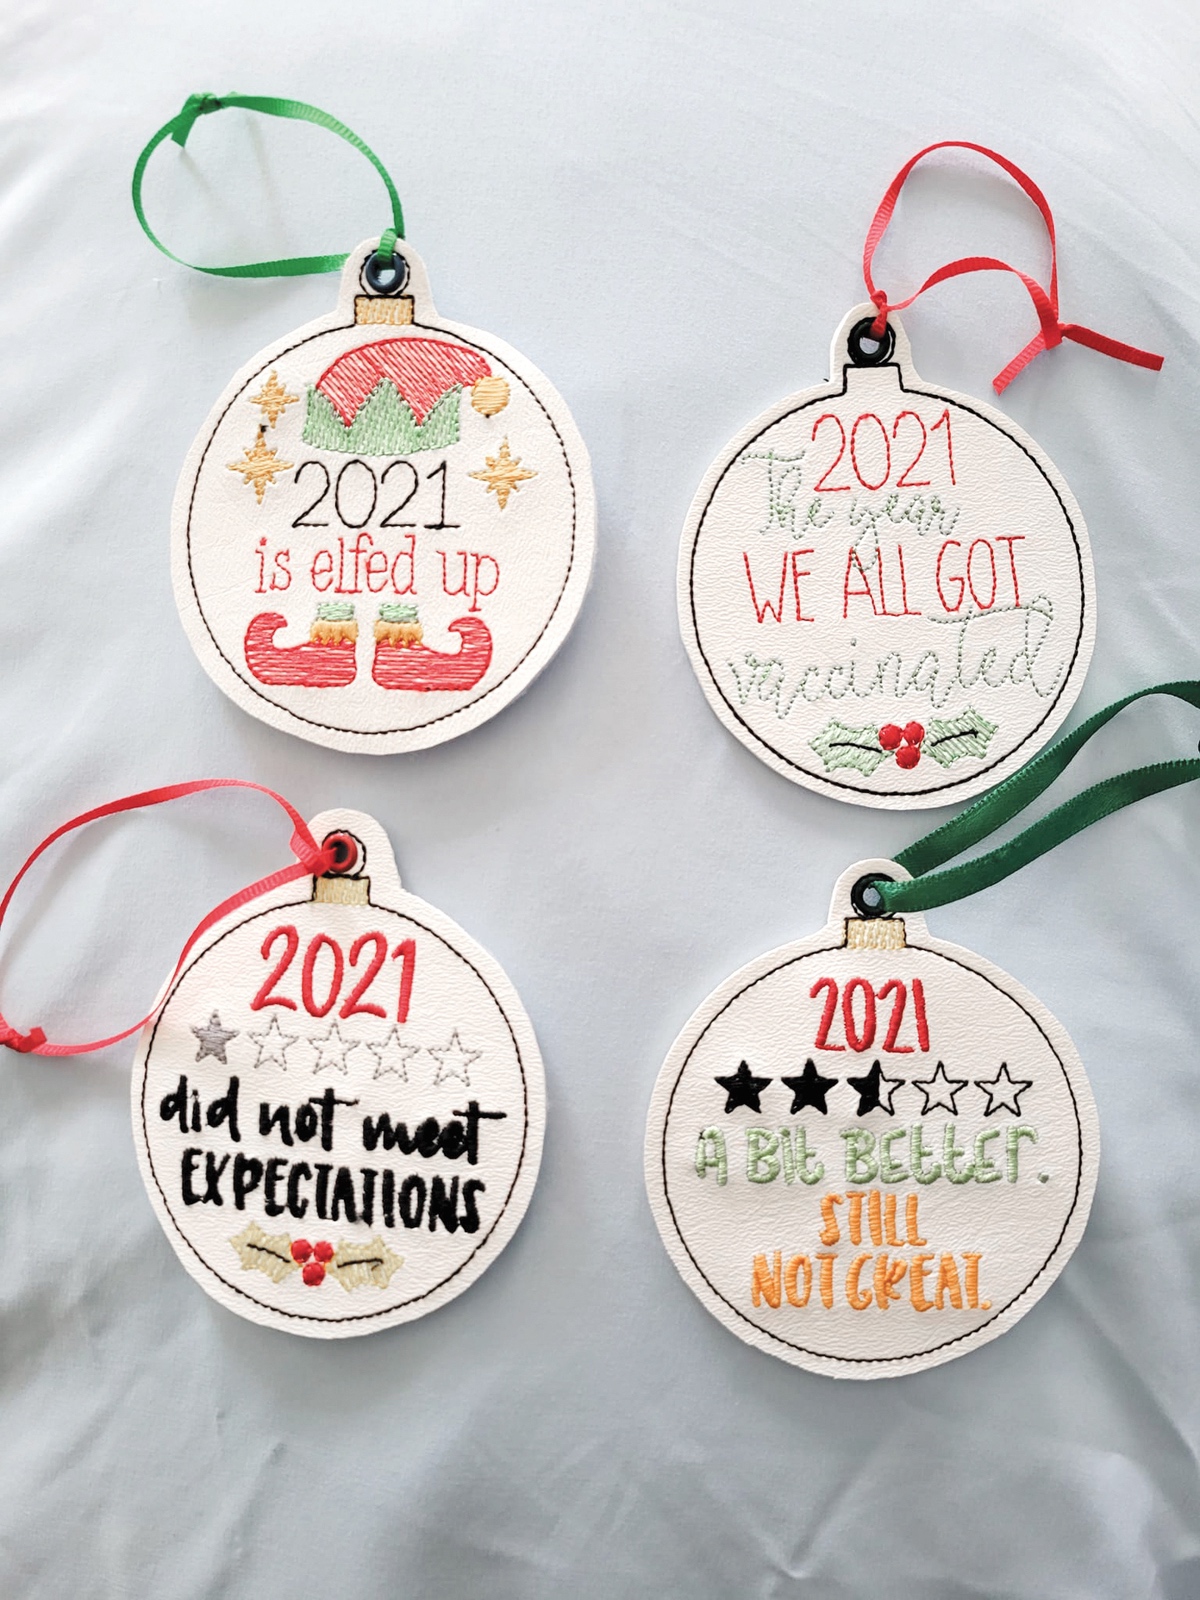 Bringing humor to the dreariness of the pandemic, Bell stitched these funny 2021 holiday ornaments.